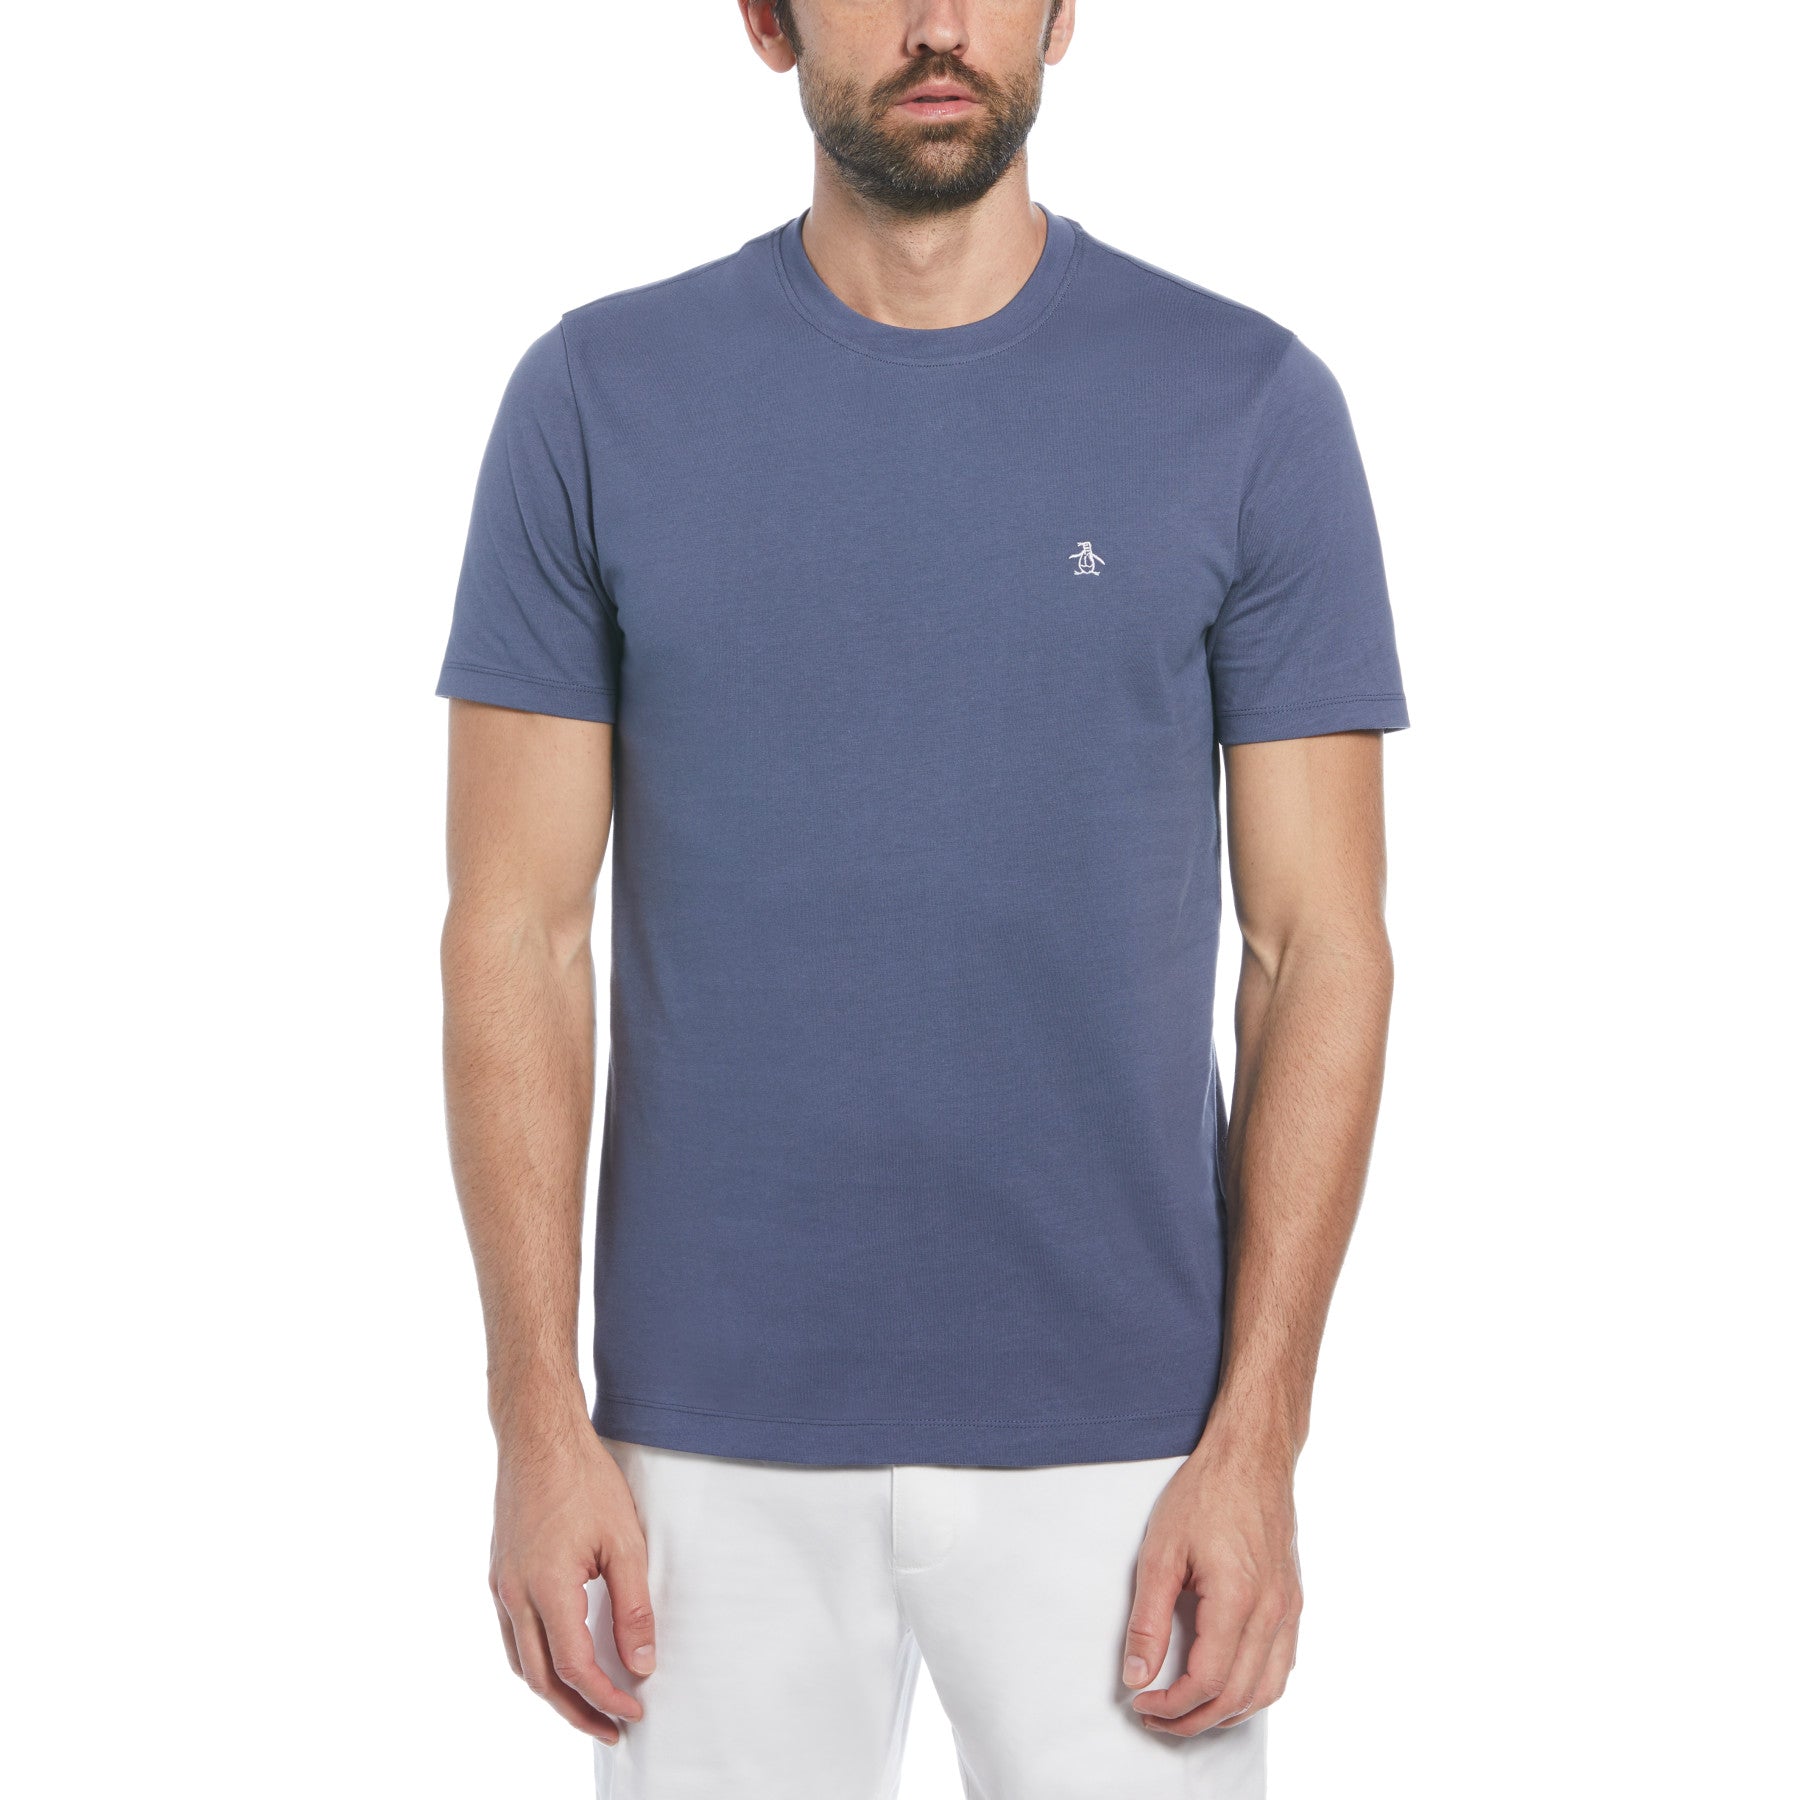 View Pin Point Embroidered Pete TShirt In Blue Indigo information